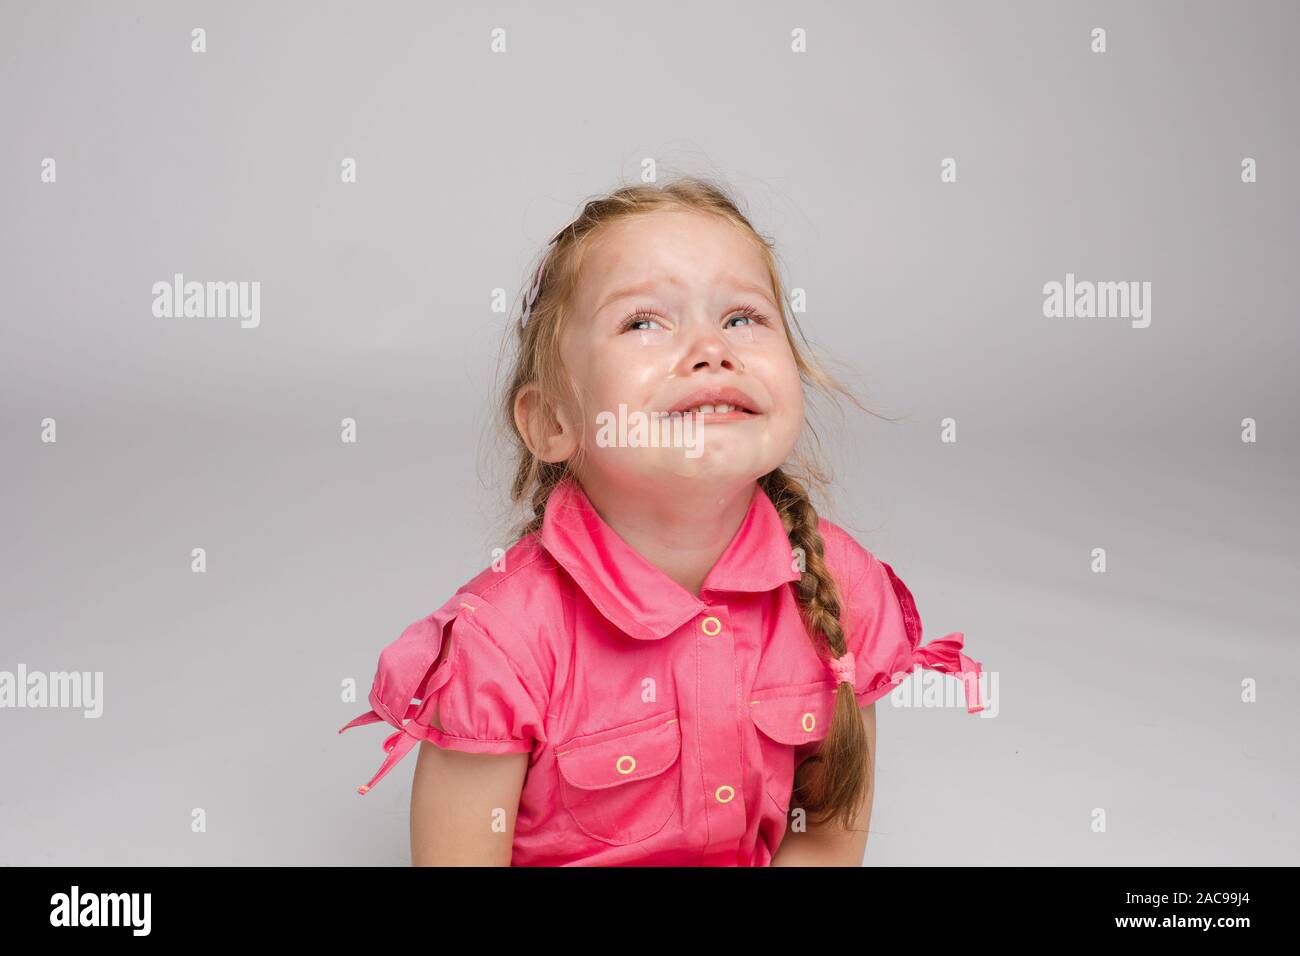 Adorable kid crying on the floor.he is looking at the camera while sobbing. Stock Photo